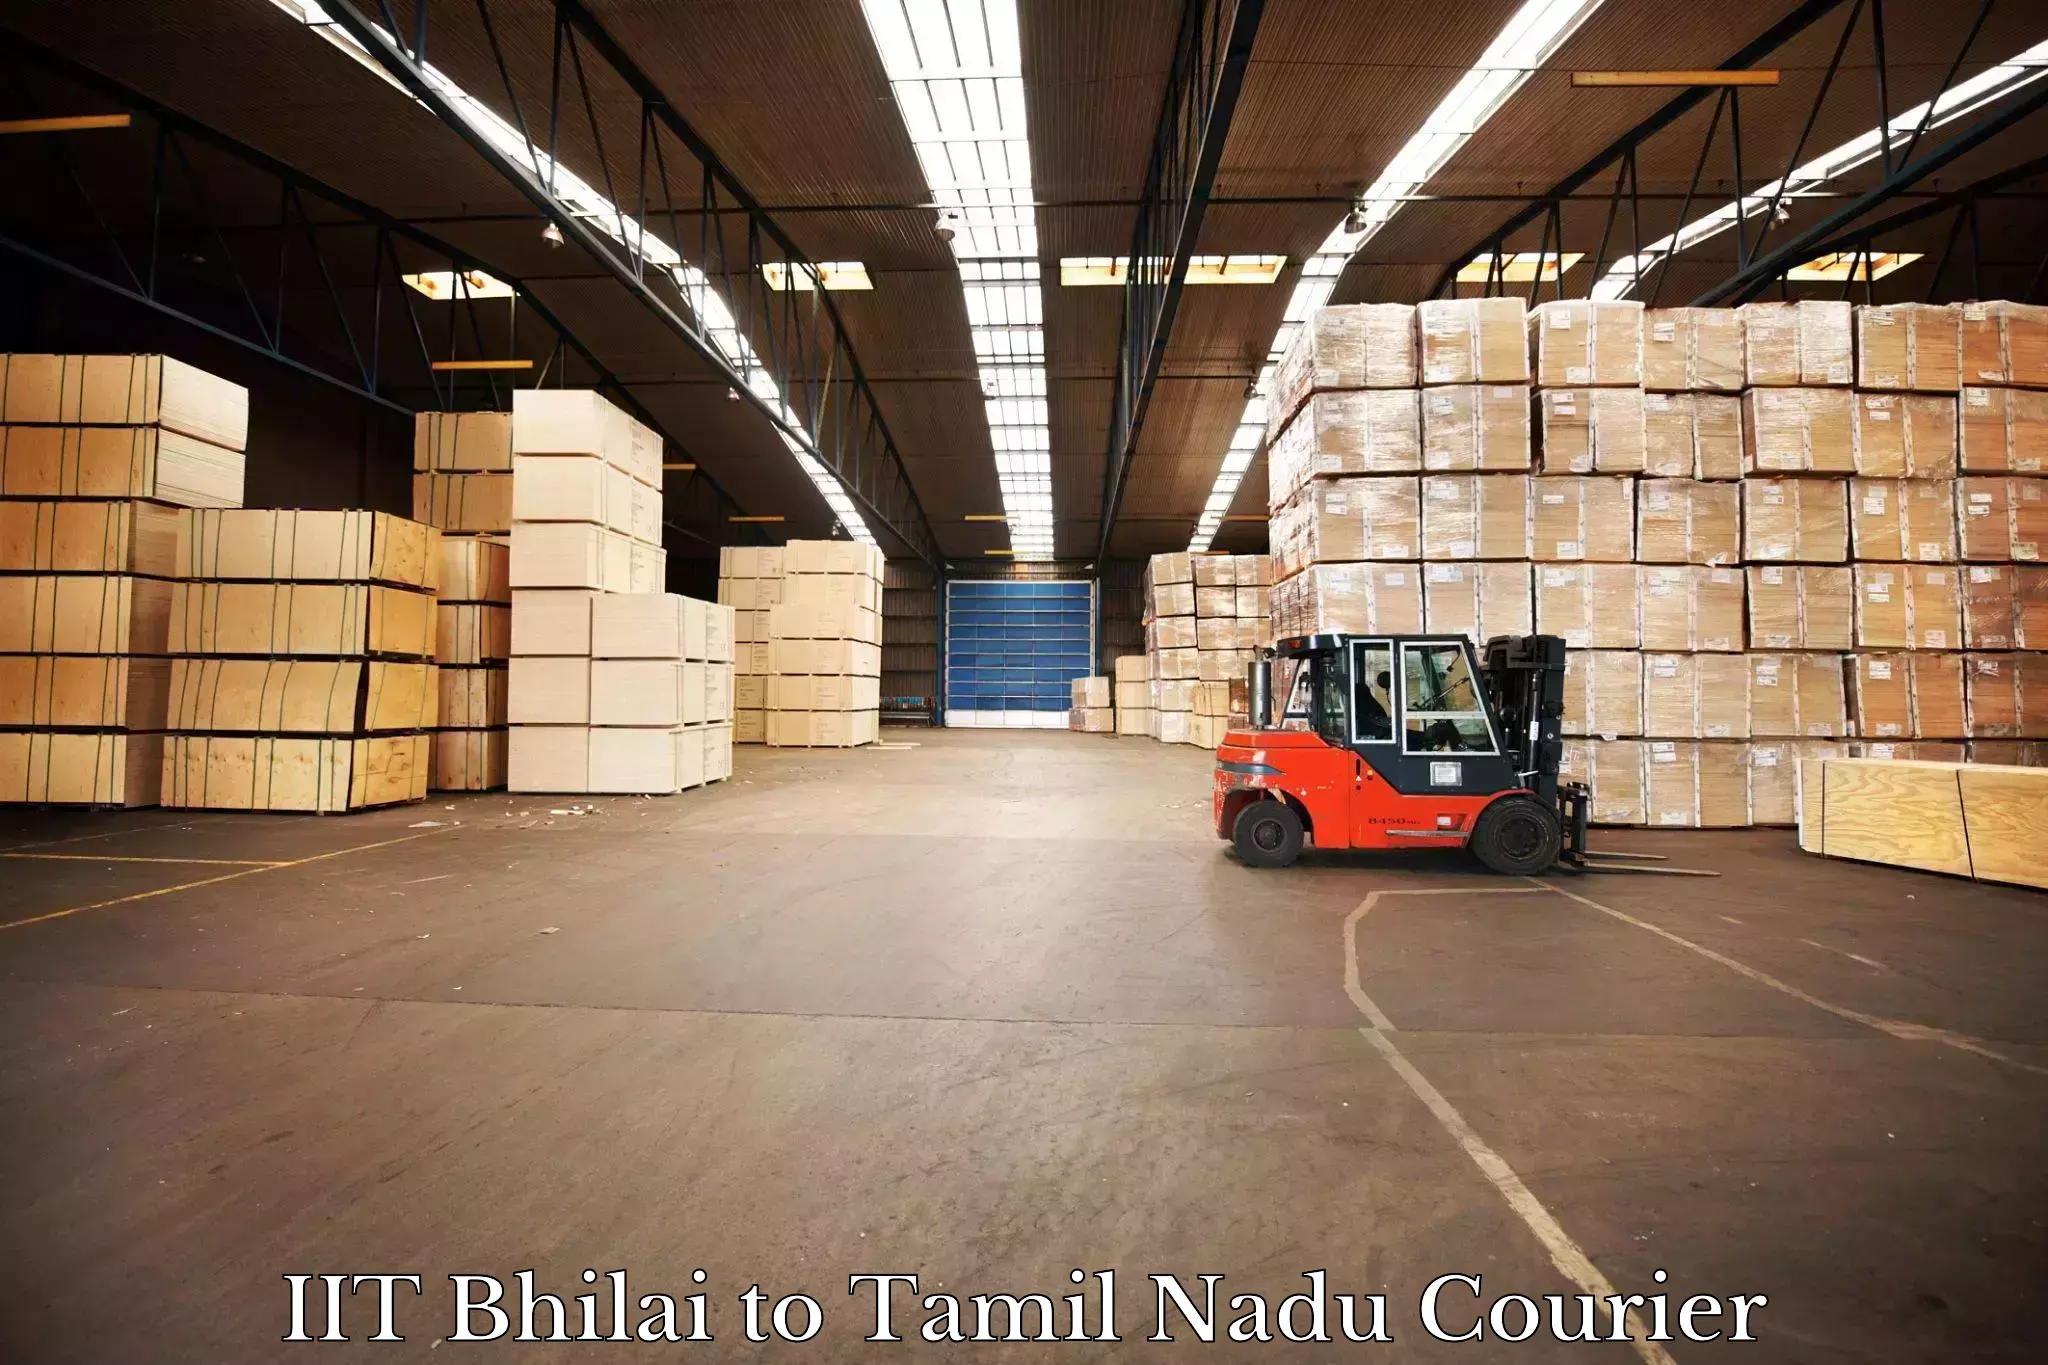 Courier dispatch services IIT Bhilai to Erode